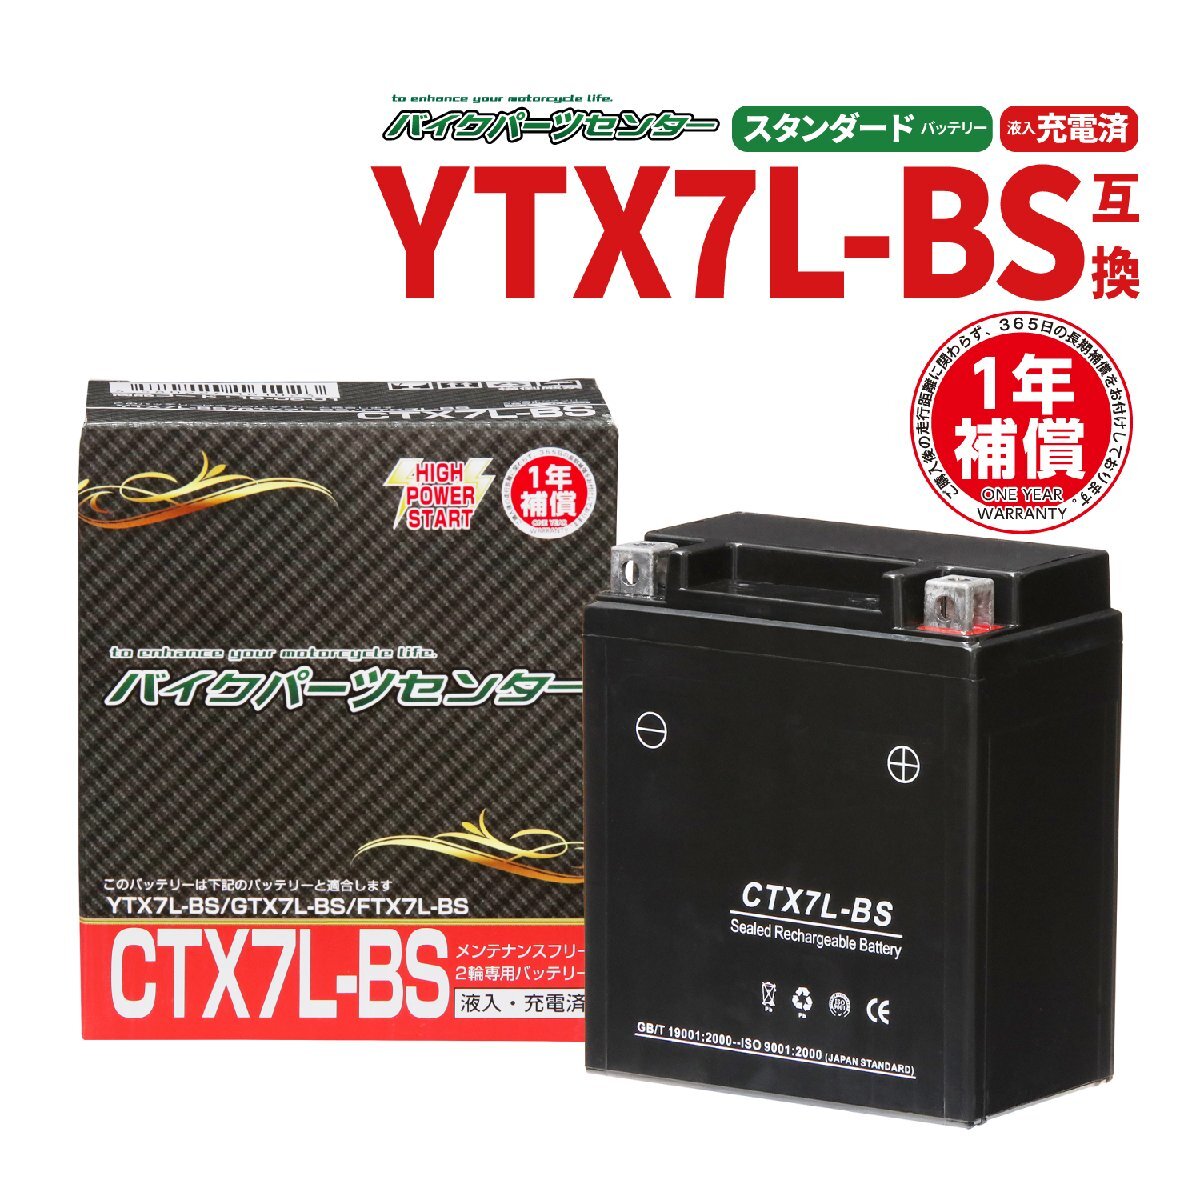 YTX7L-BS互換 CTX7L-BS バイク バッテリー リード110 Dio110 1年間保証 新品 充電済み バイクパーツセンターの画像1